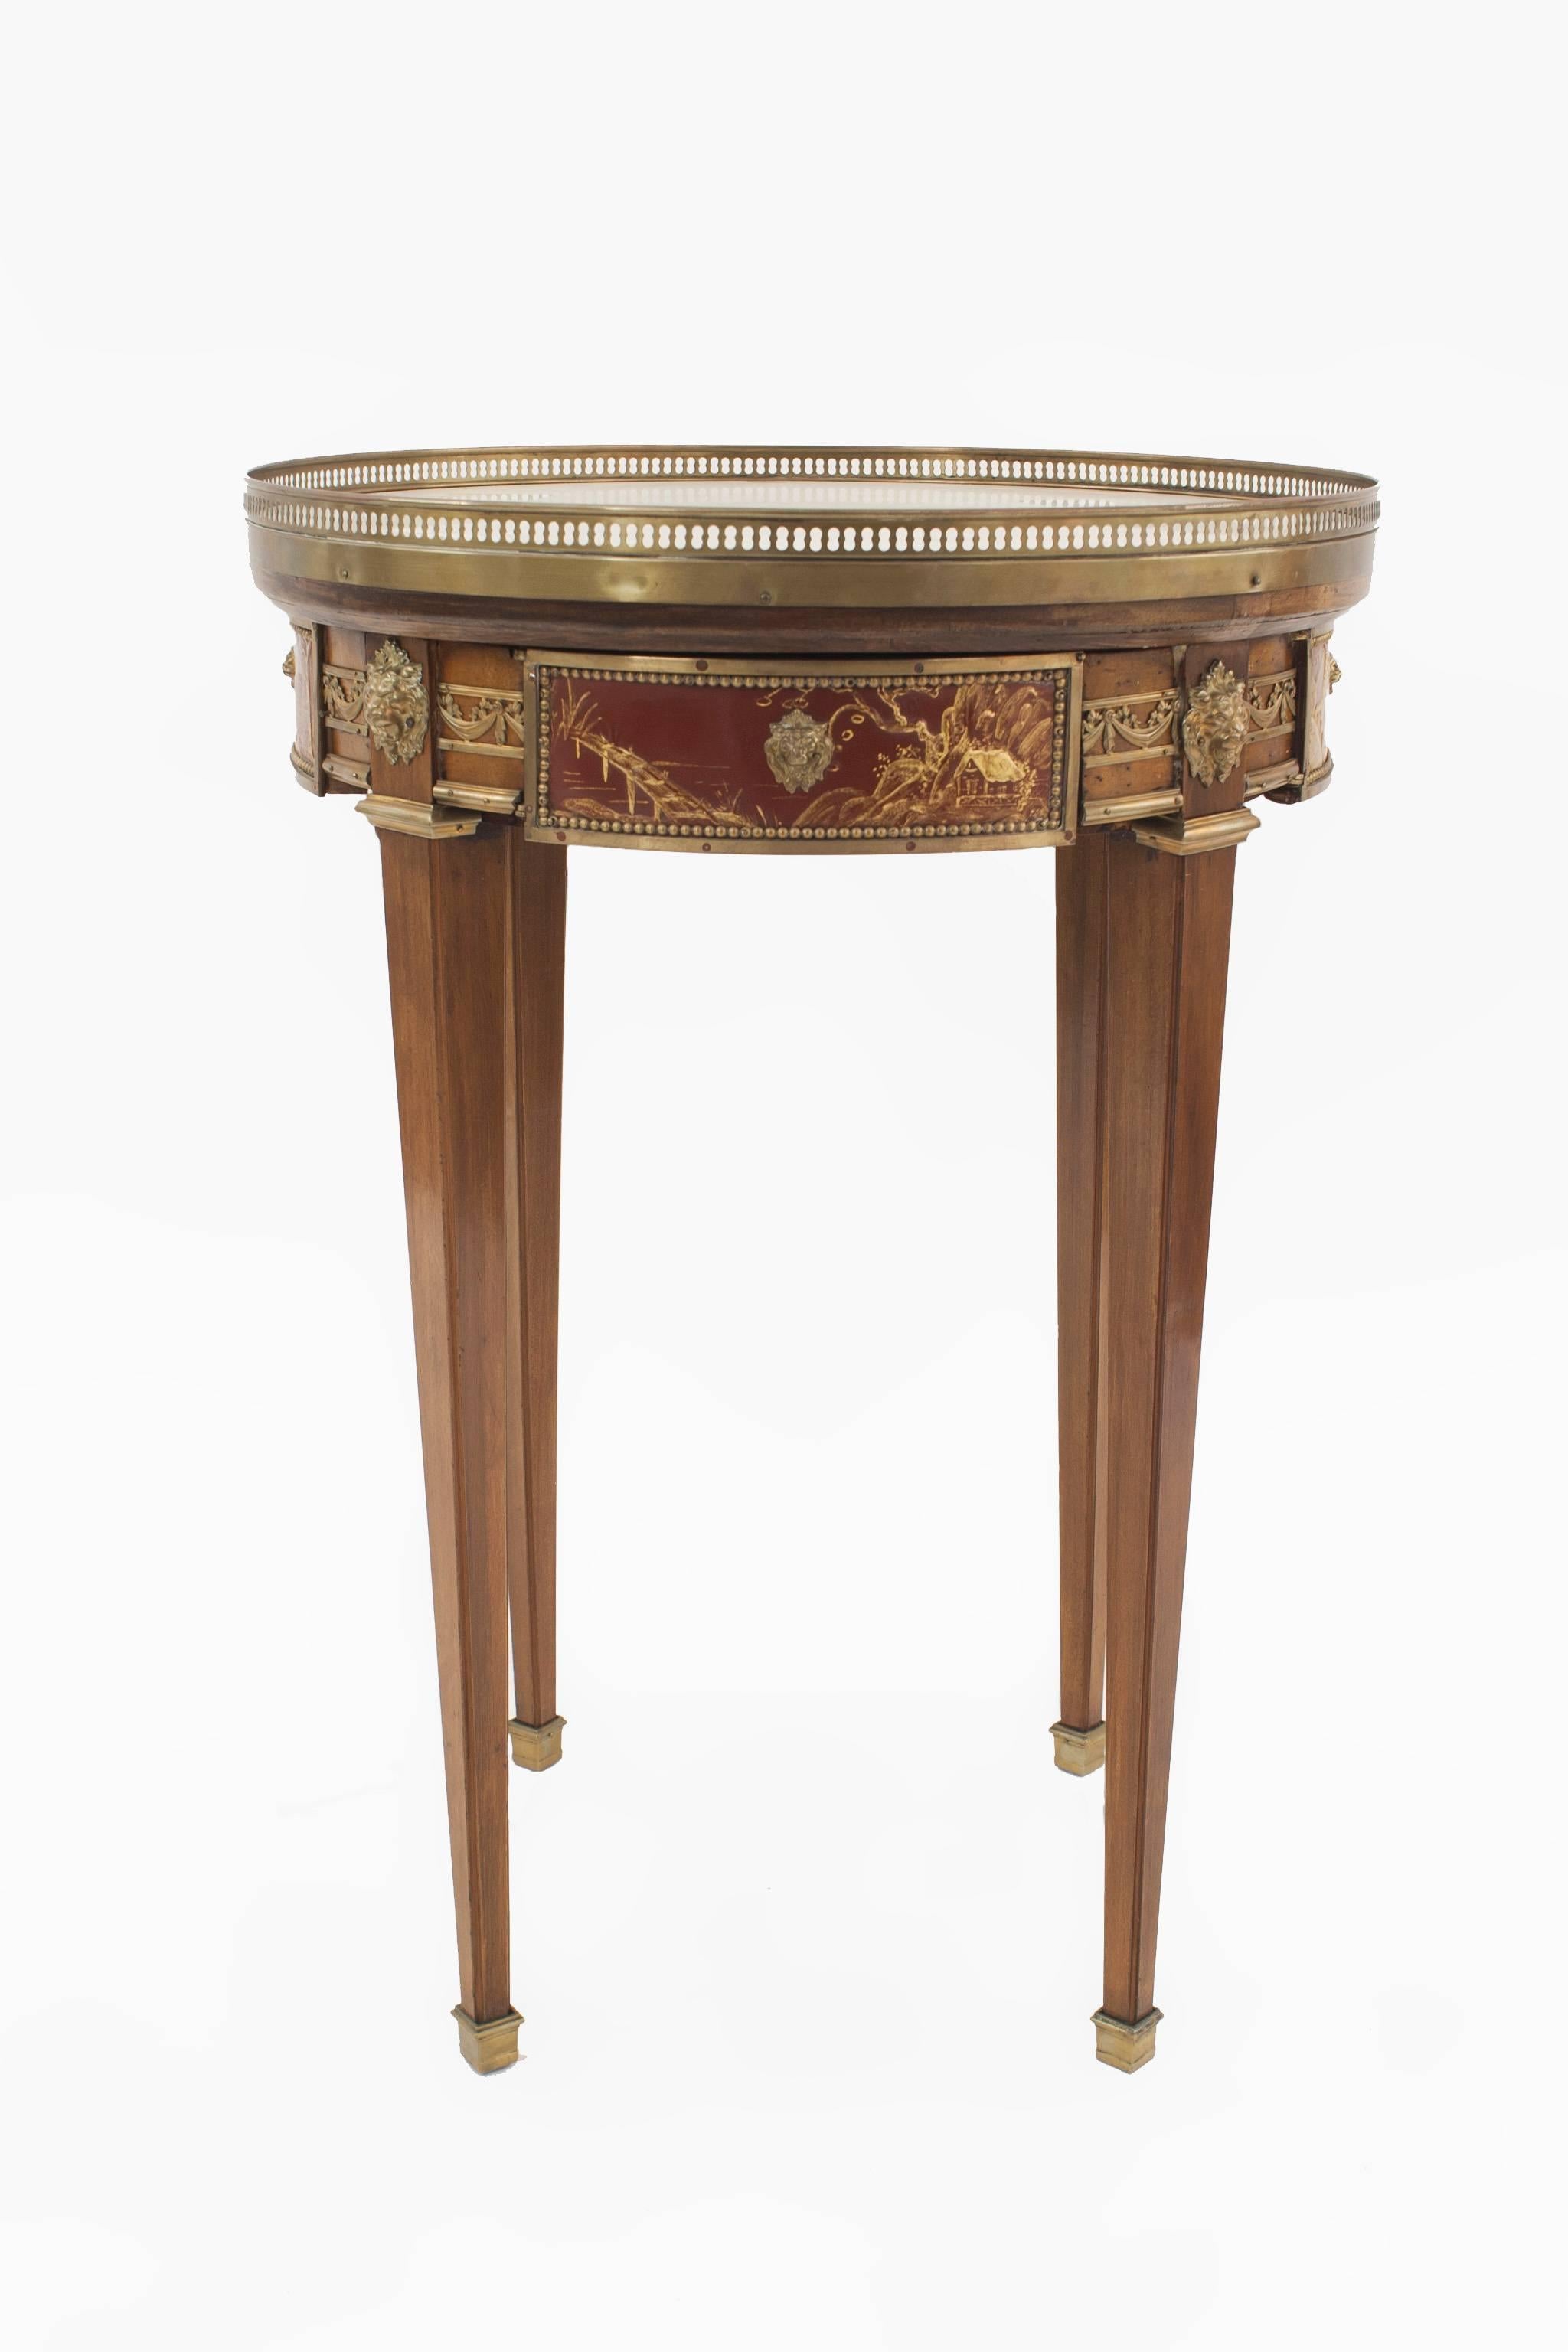 French Louis XVI-style (19th Century) mahogany and bronze trimmed mechanical end table with Chinoiserie apron and white marble top.
